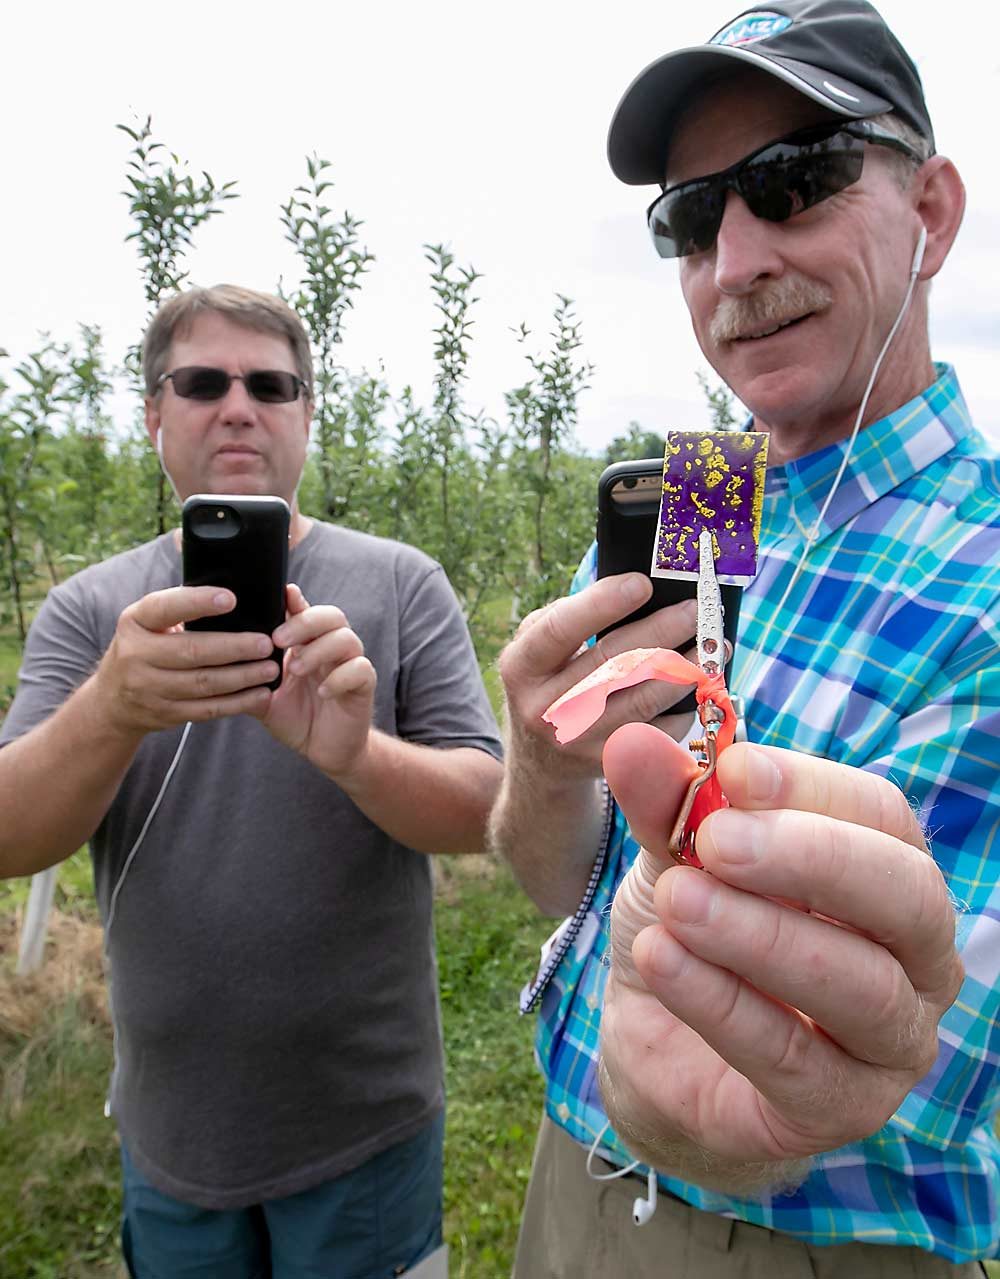 Dale Goldy, Gold Crown Nursery, left, and Tim Welsh, Columbia Fruit Packers Inc., take photos of an oversprayed test paper during a demonstration of crop-adapted spraying. Overapplication is common in new, high-density, narrow-canopy orchards, said spray specialist Jason Deveau. (TJ Mullinax/Good Fruit Grower)